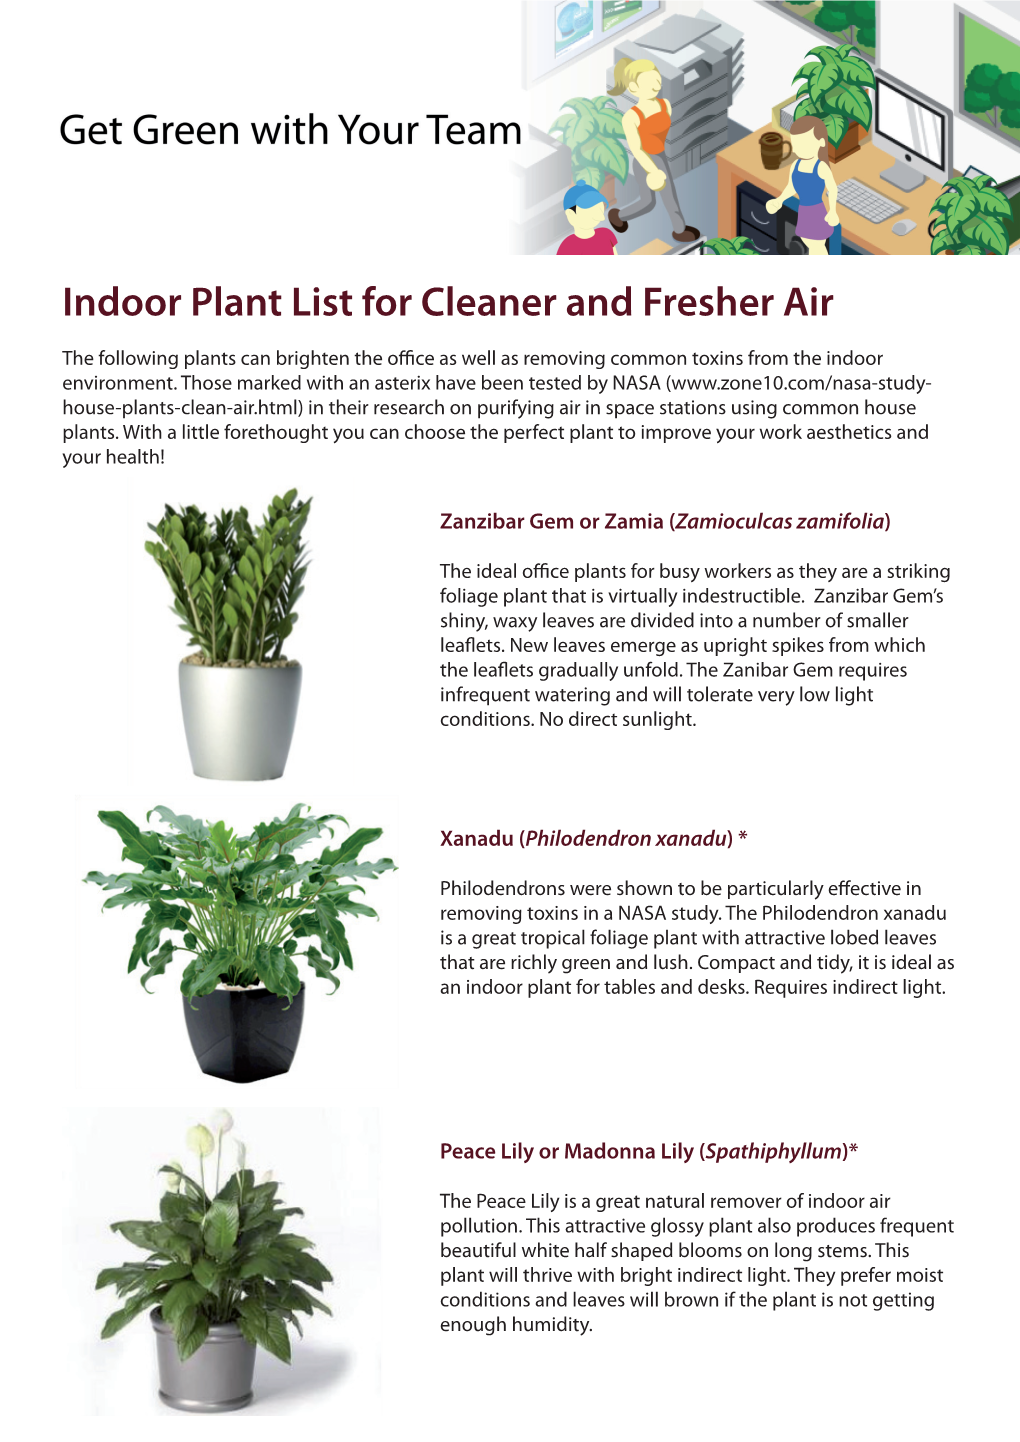 Indoor Plant List for Cleaner and Fresher Air